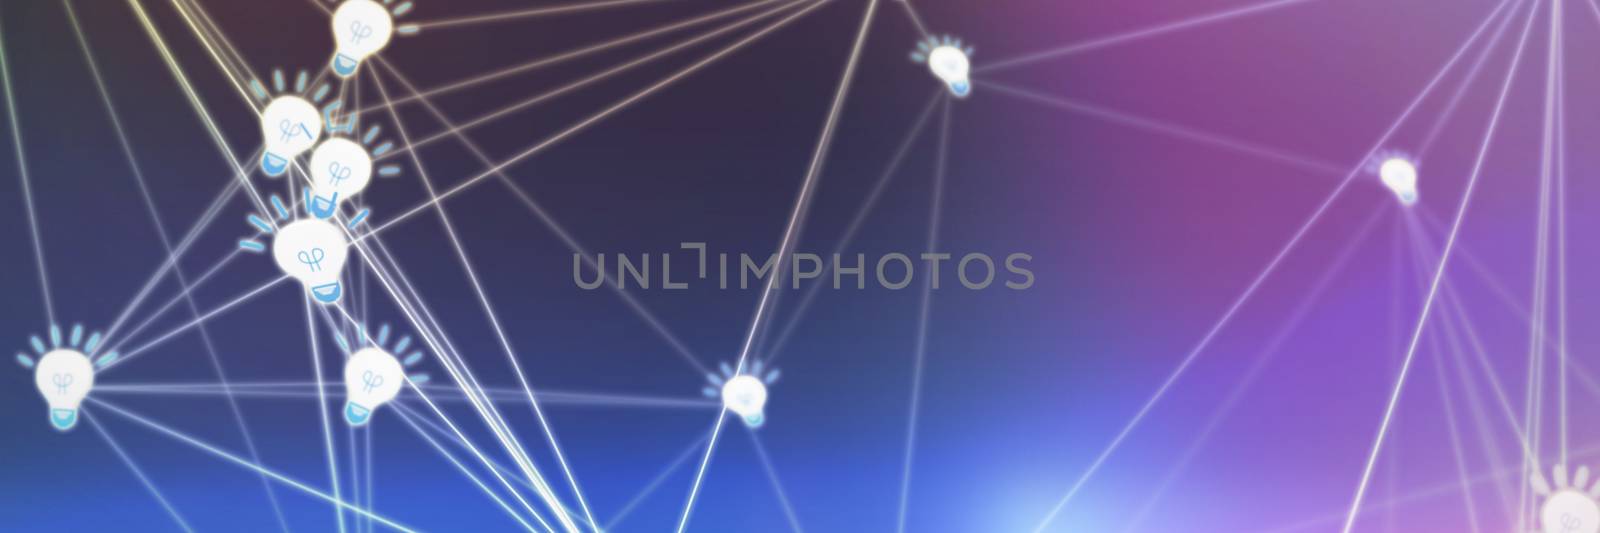 Abstract image of lightbulbs against abstract blue background